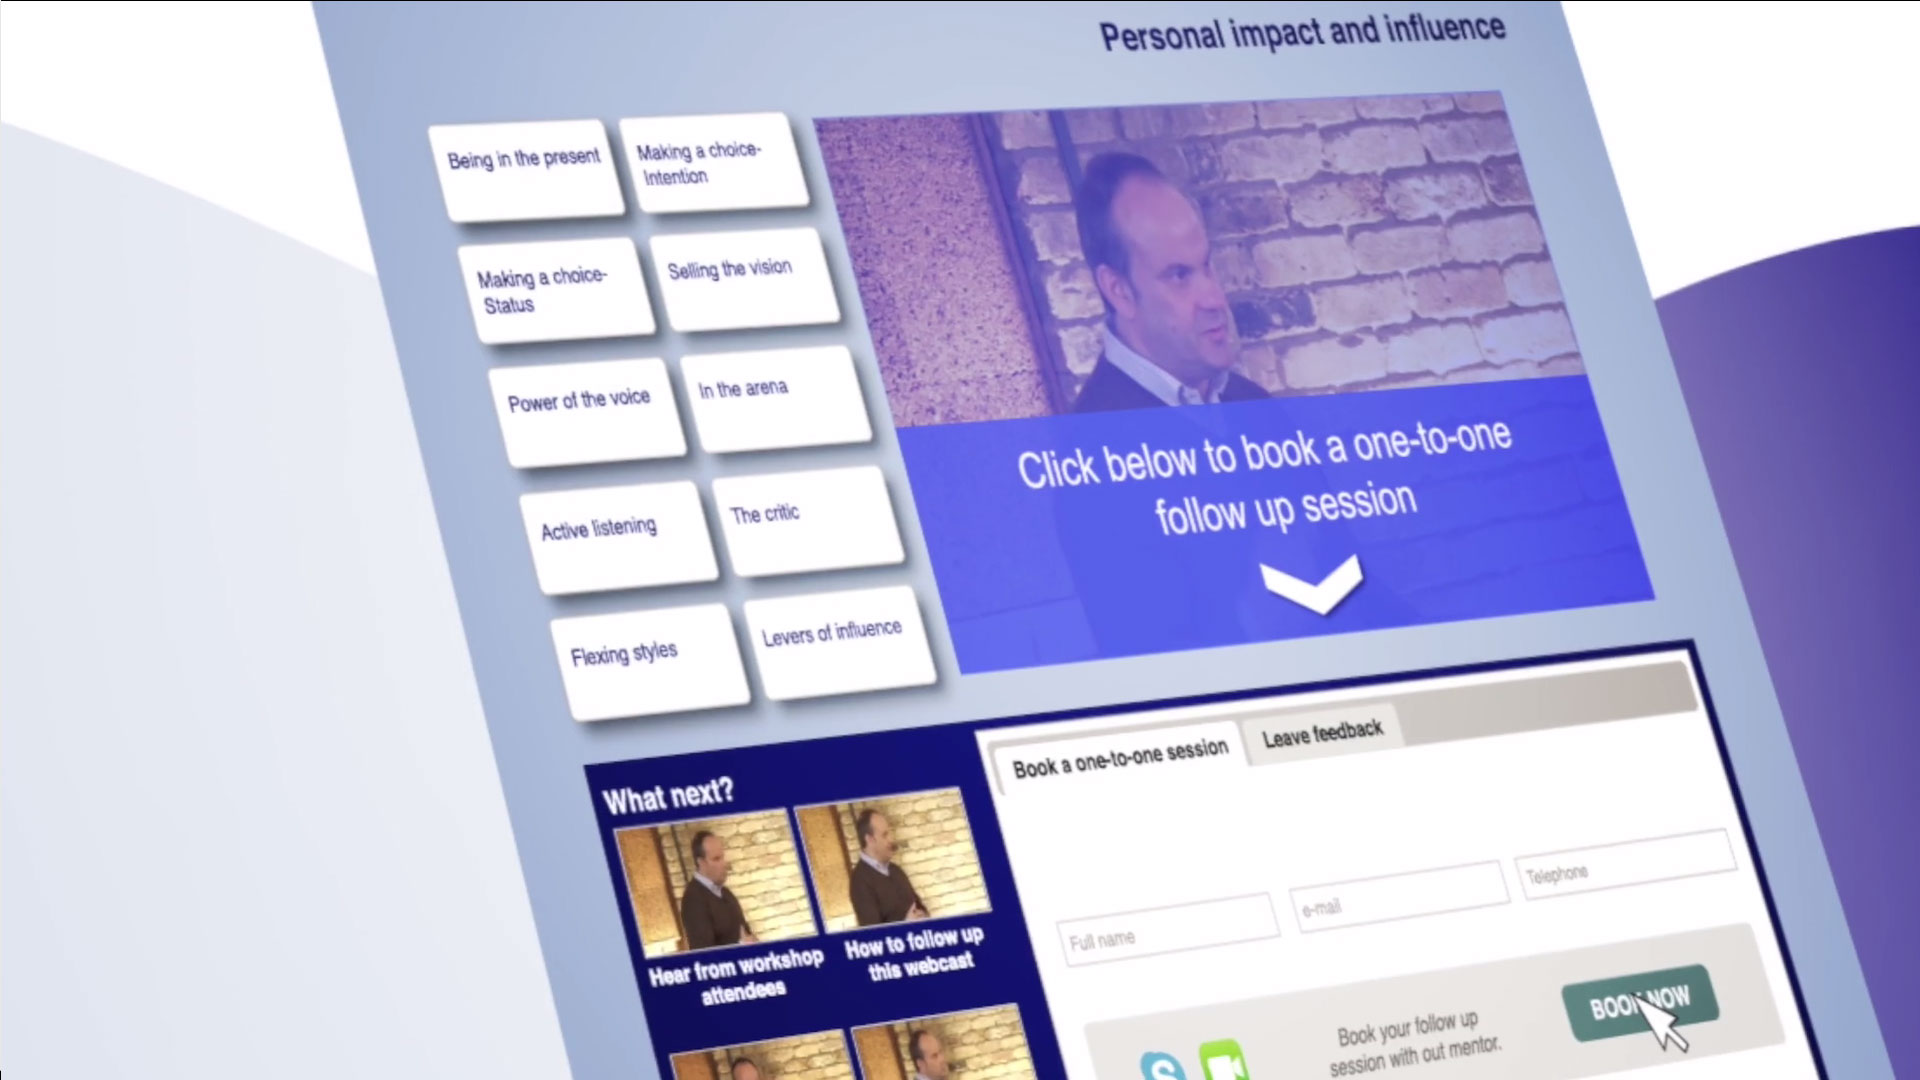 Personal Impact and Influence - American Express